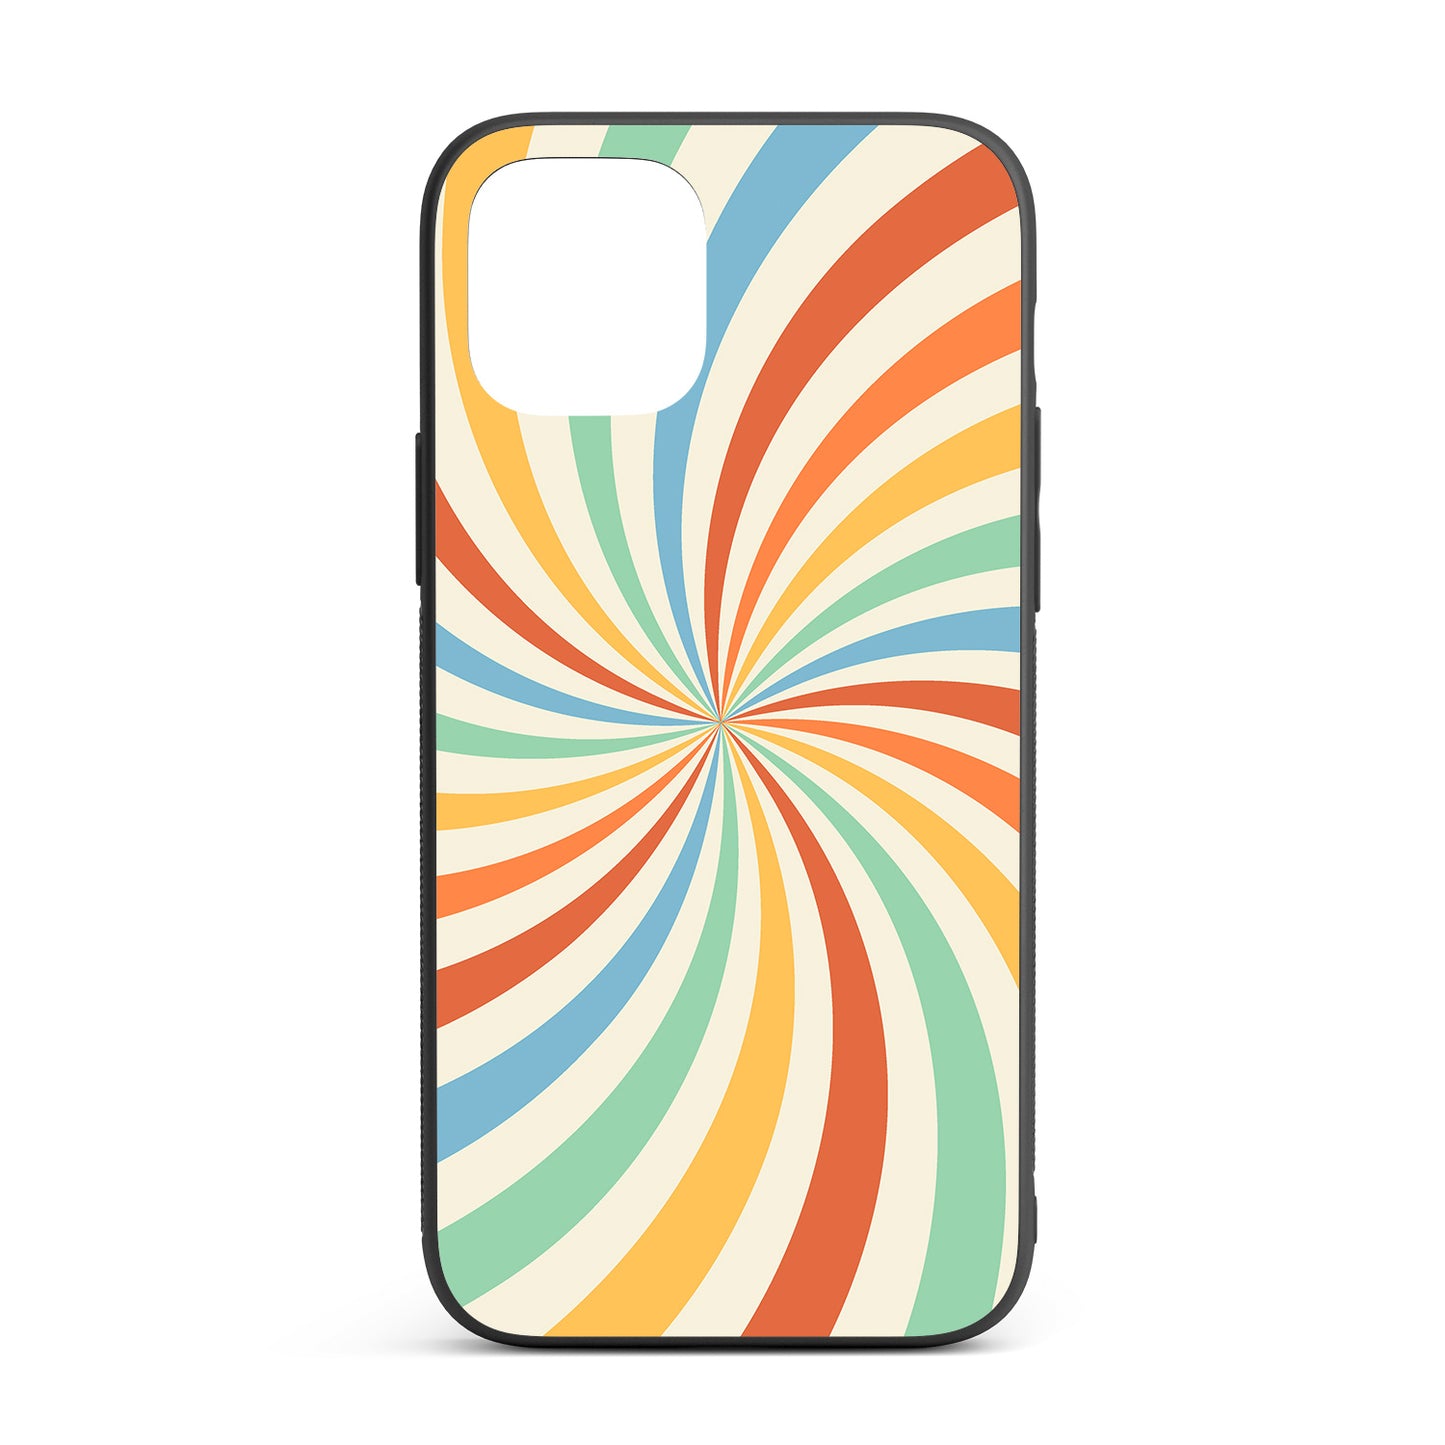 Retro Candy iPhone glass case